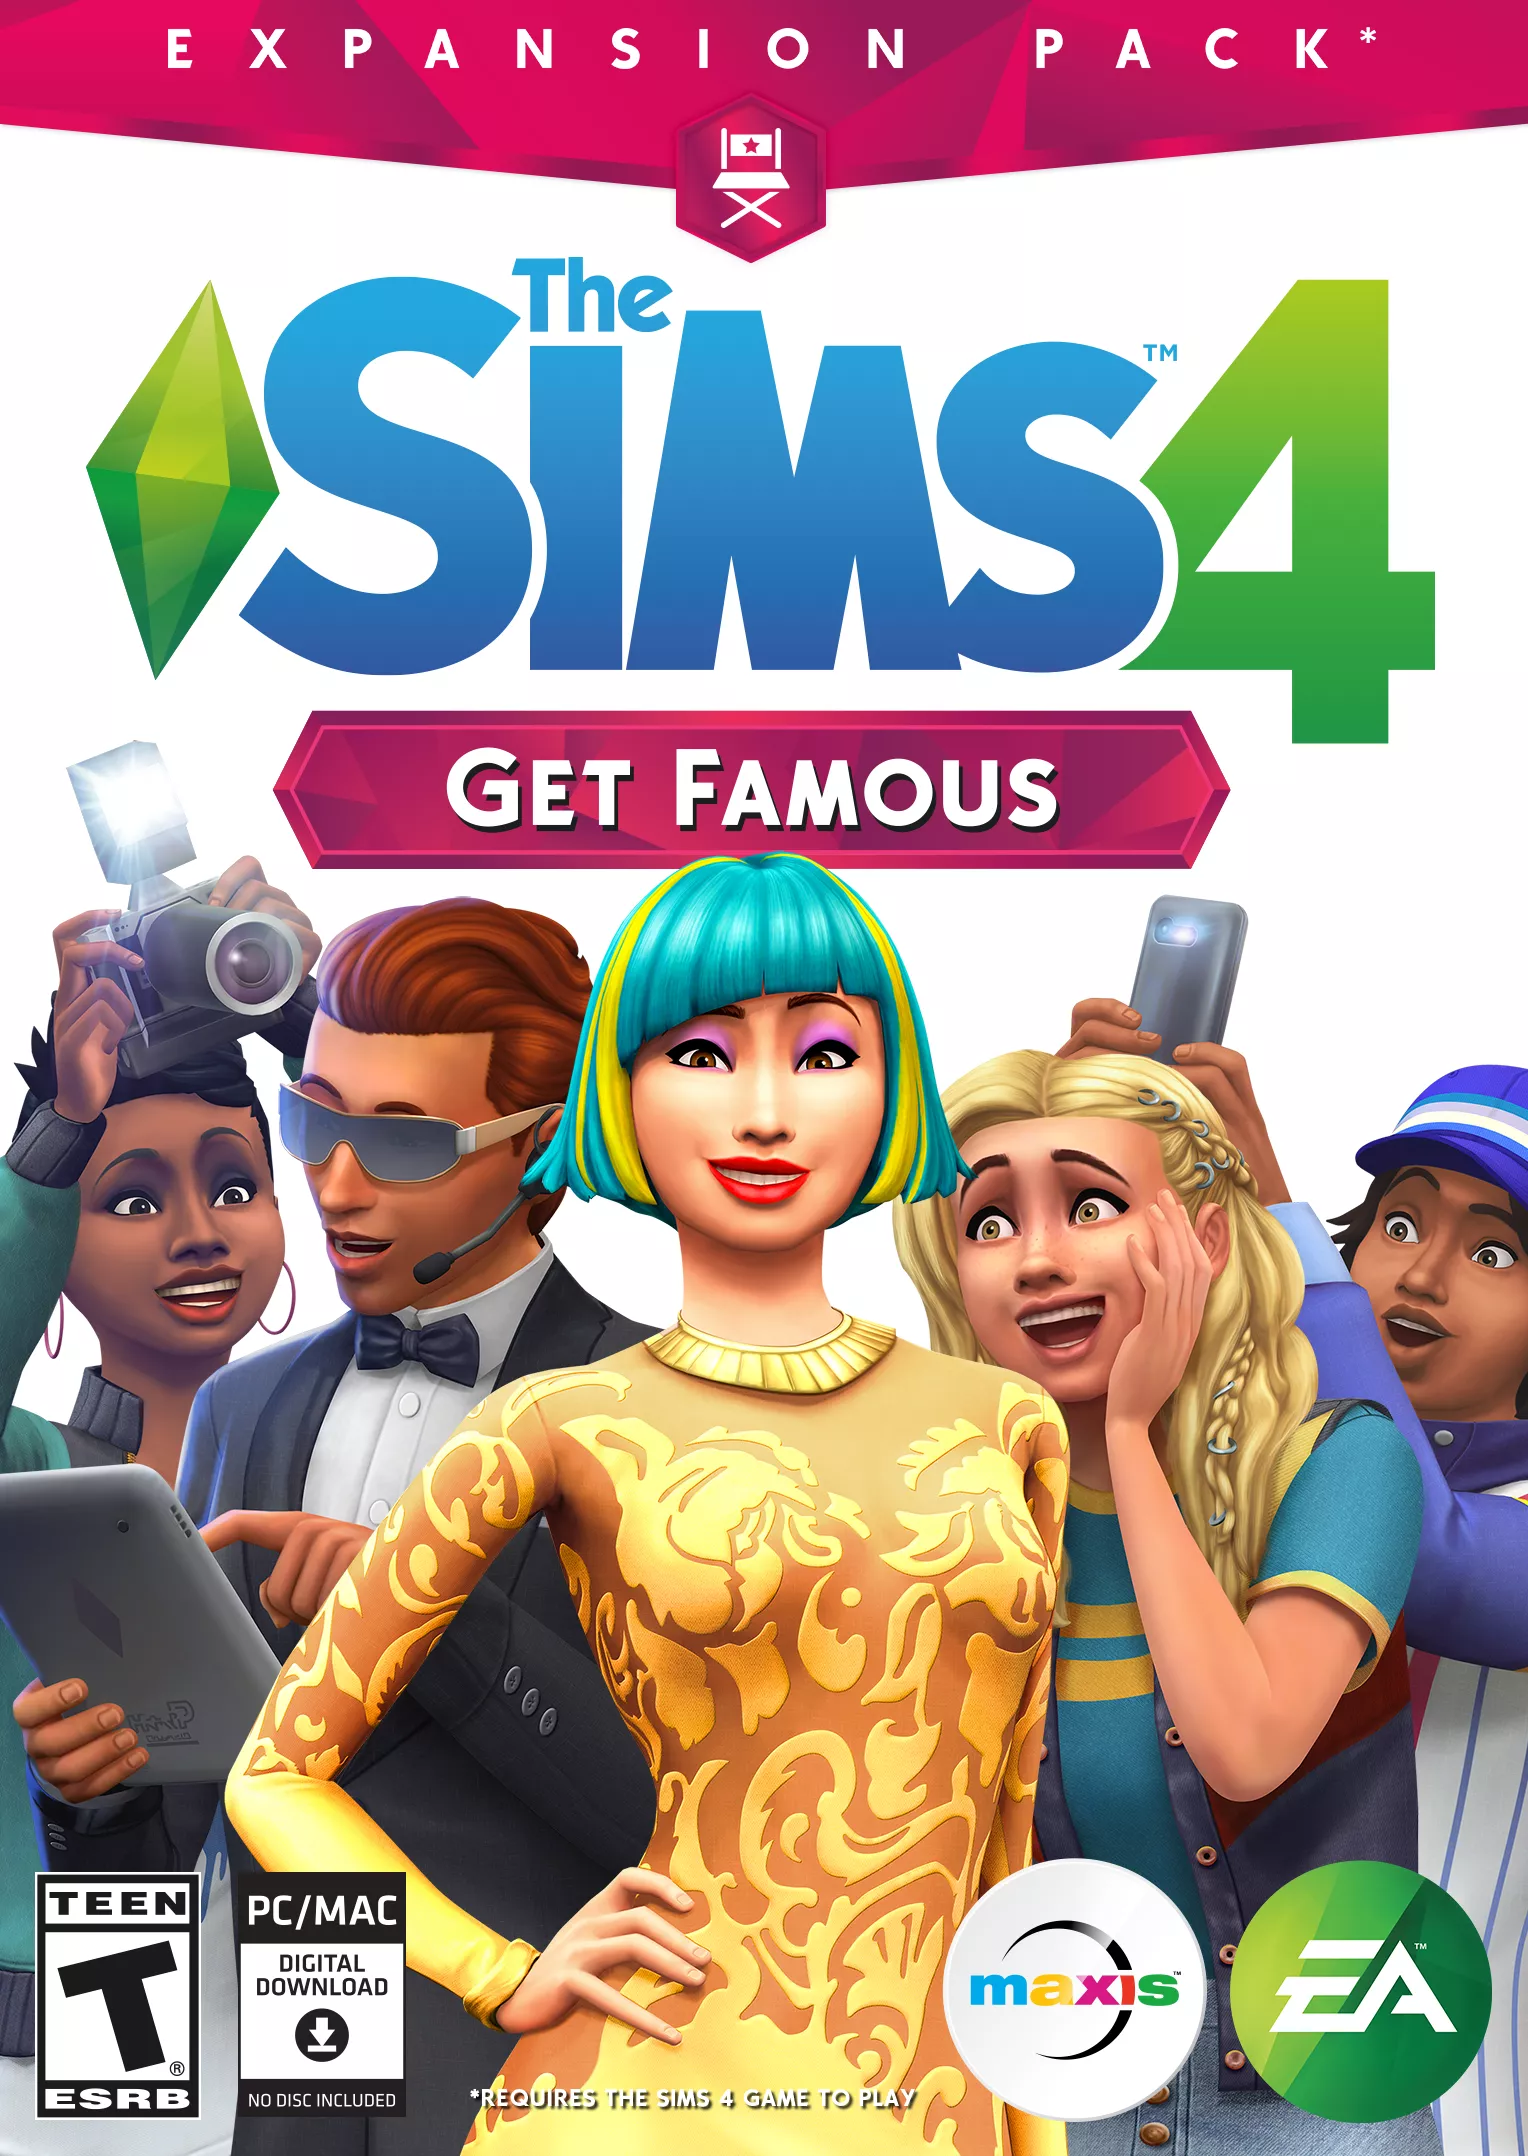 Dictatuur hoek Installeren The Sims 4: Get Famous' Expansion Pack Release Date Confirmed For November